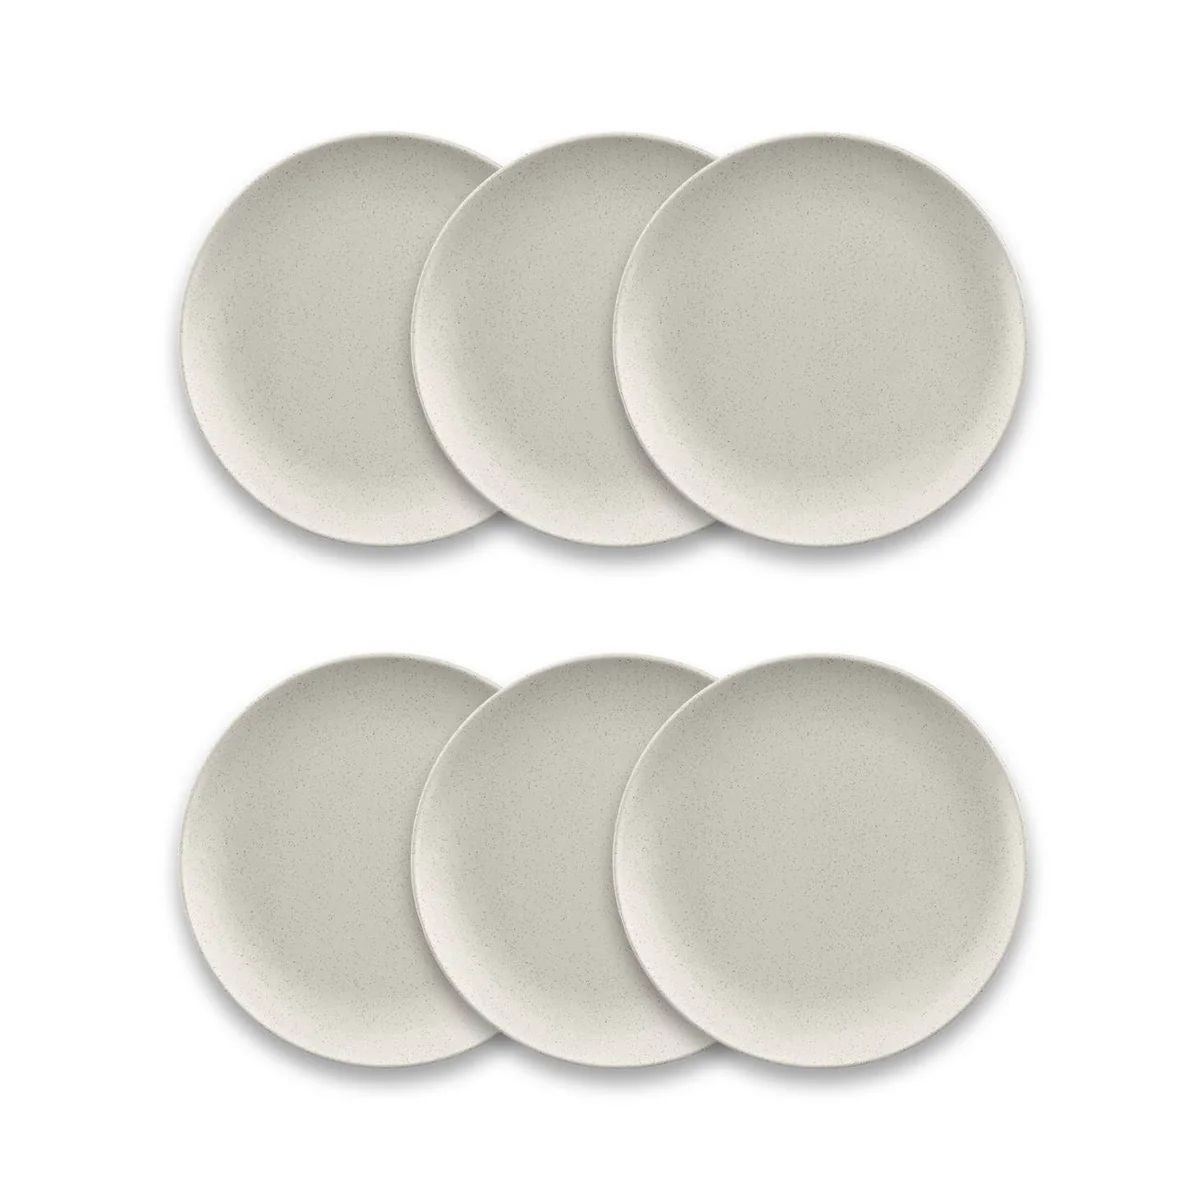 WHEAT STRAW SALAD PLATES - SET OF 6 | Cooper at Home